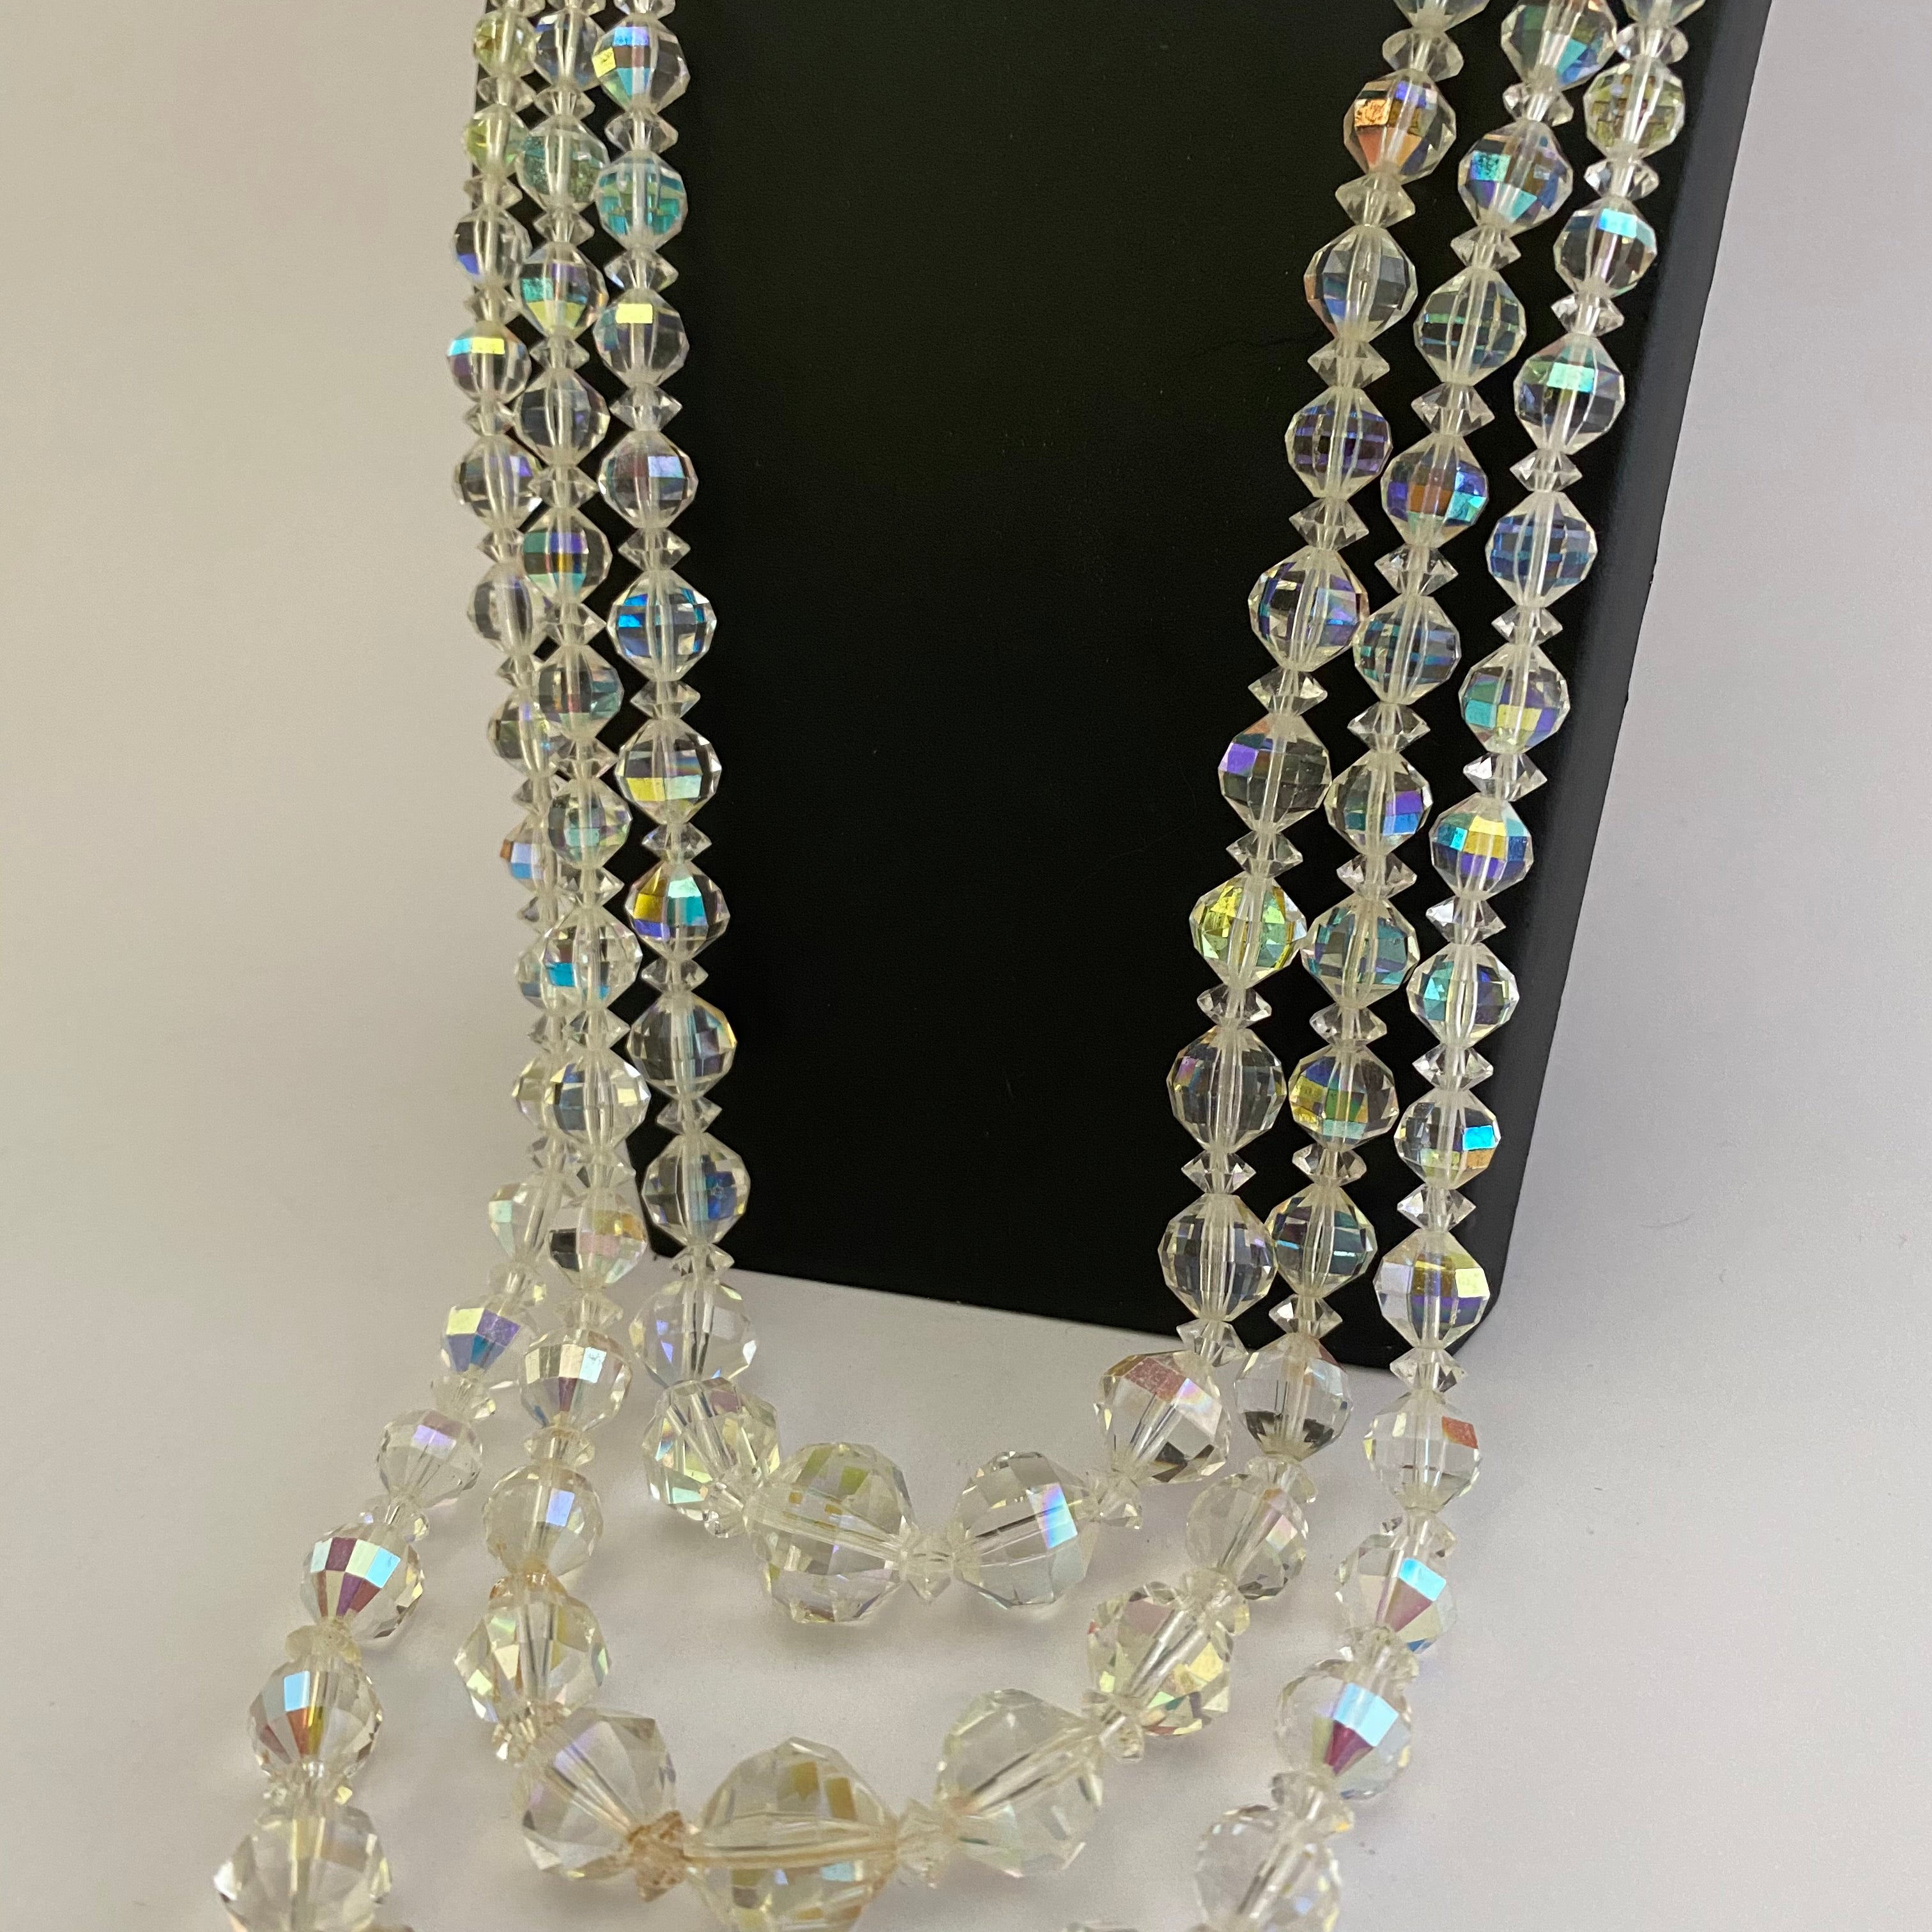 Vintage Crystal Necklace by Exquisite 50s/60s Sparkling Statement Necklace  Aurora Borealis Beads, by Exquisite Triple Strand Bride - Etsy